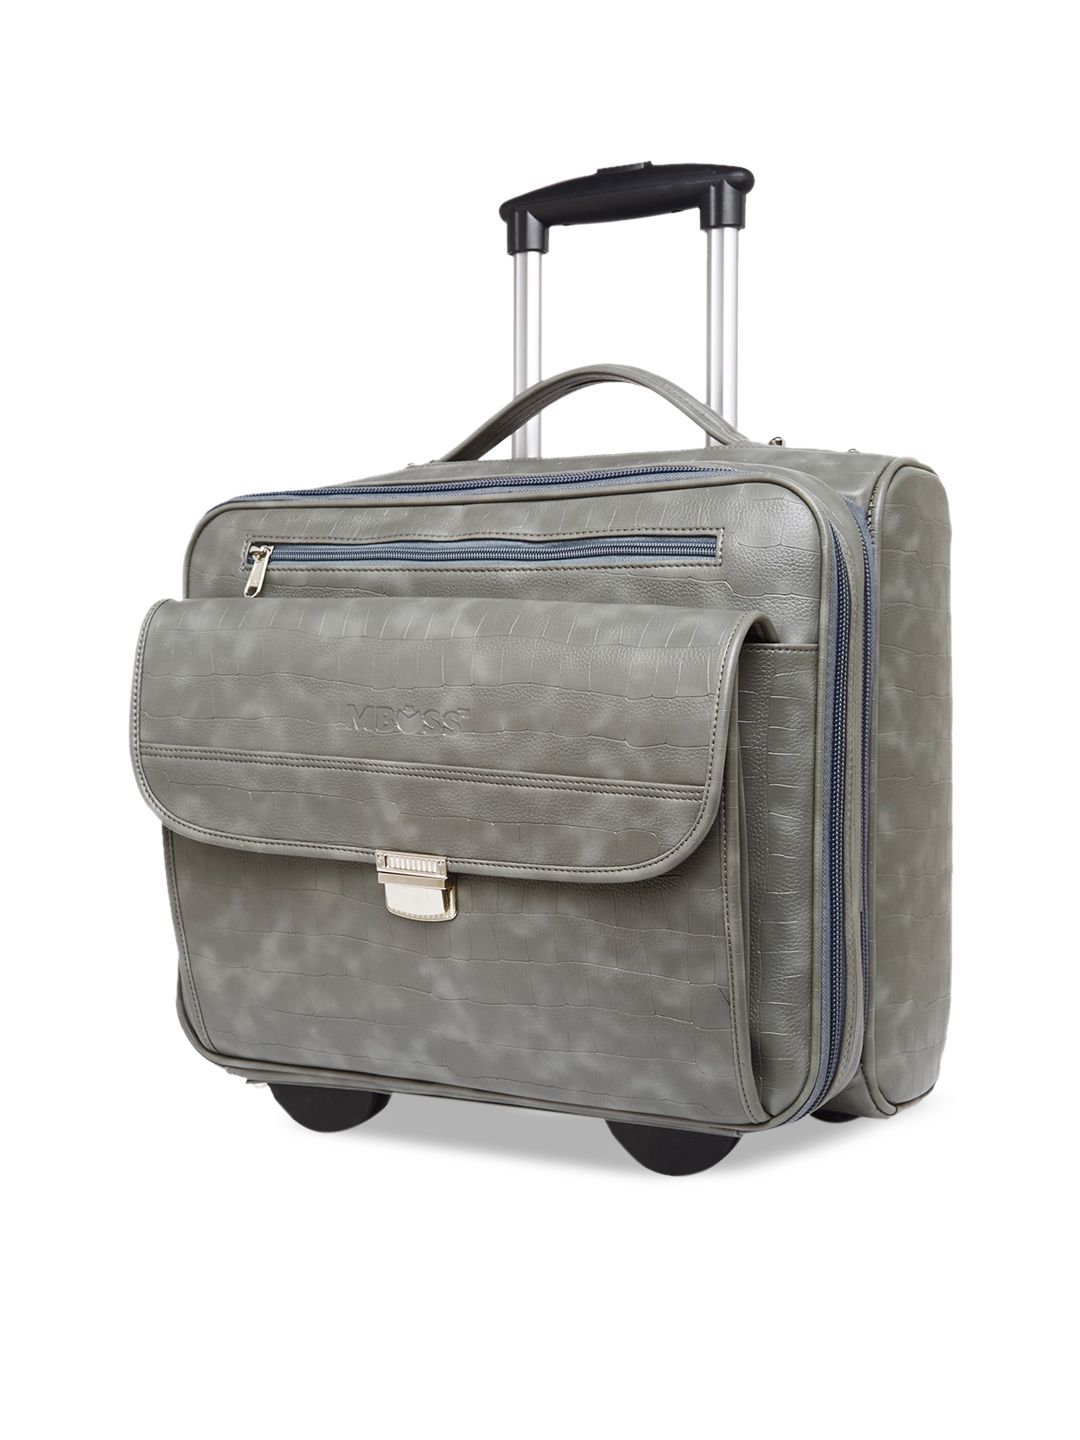 MBOSS Grey Textured Cabin Trolley Bag with Laptop Compartment Price in India